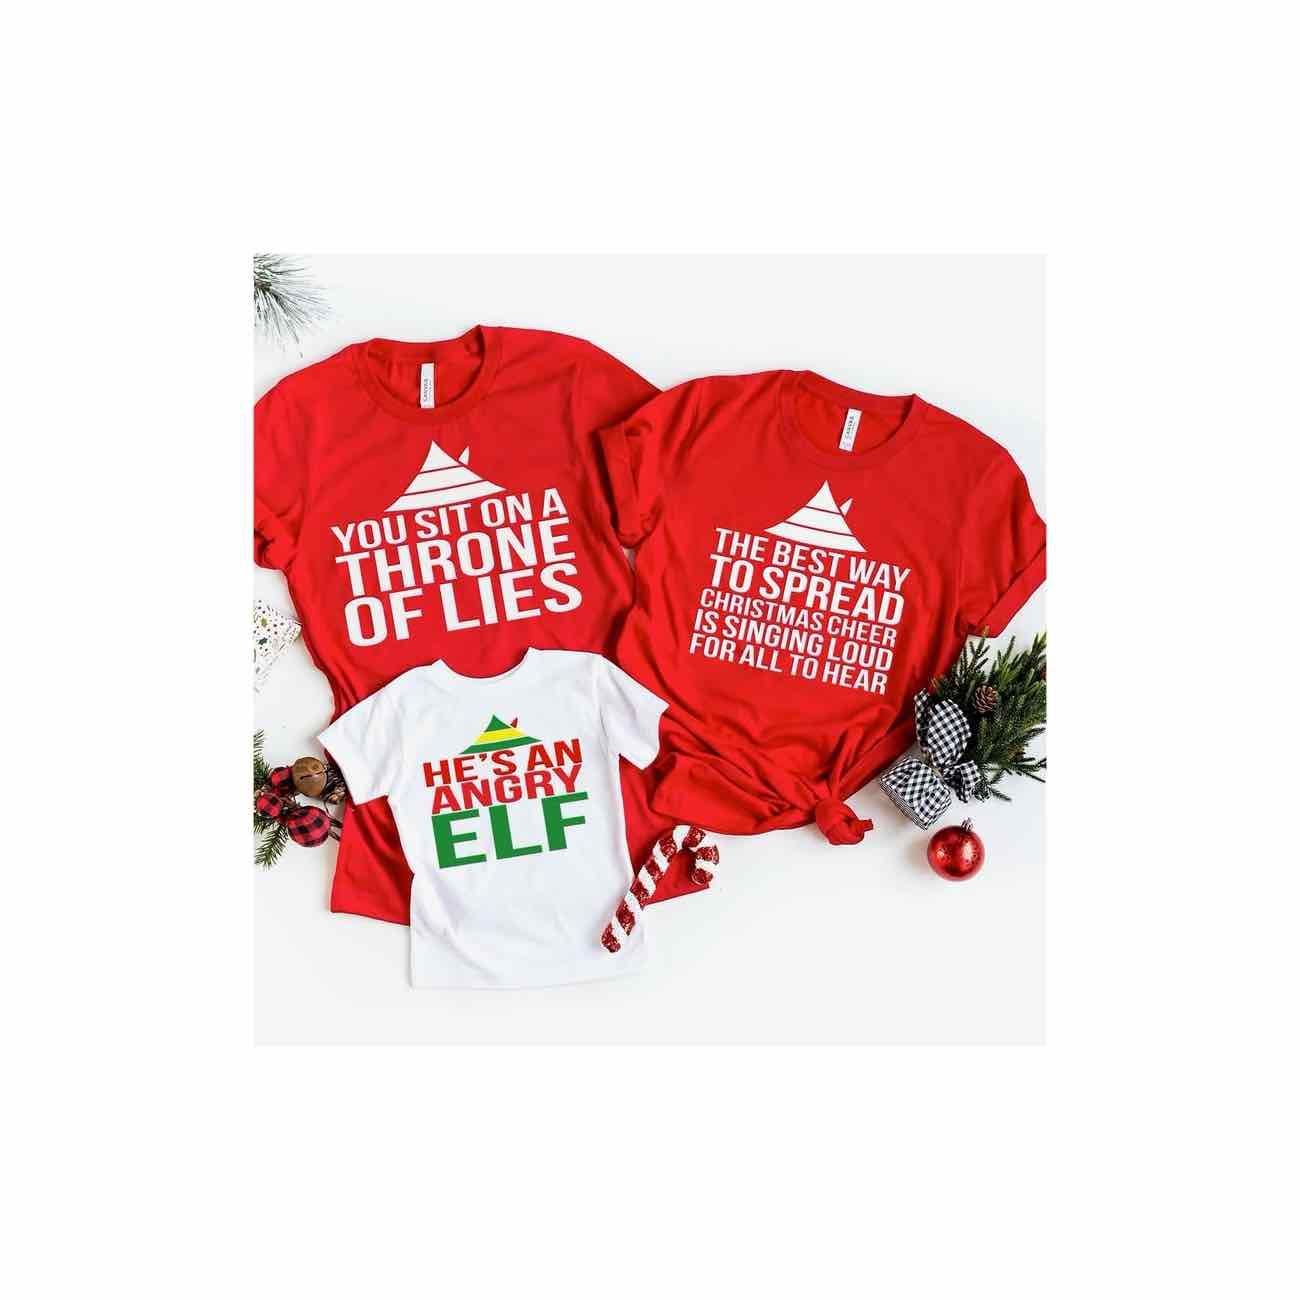 Mommy and Me Outfits Holiday Shirts Christmas Shirts Matching Shirts Winter Shirts Christmas Mommy and Me Outfits Mommy and Me Shirts